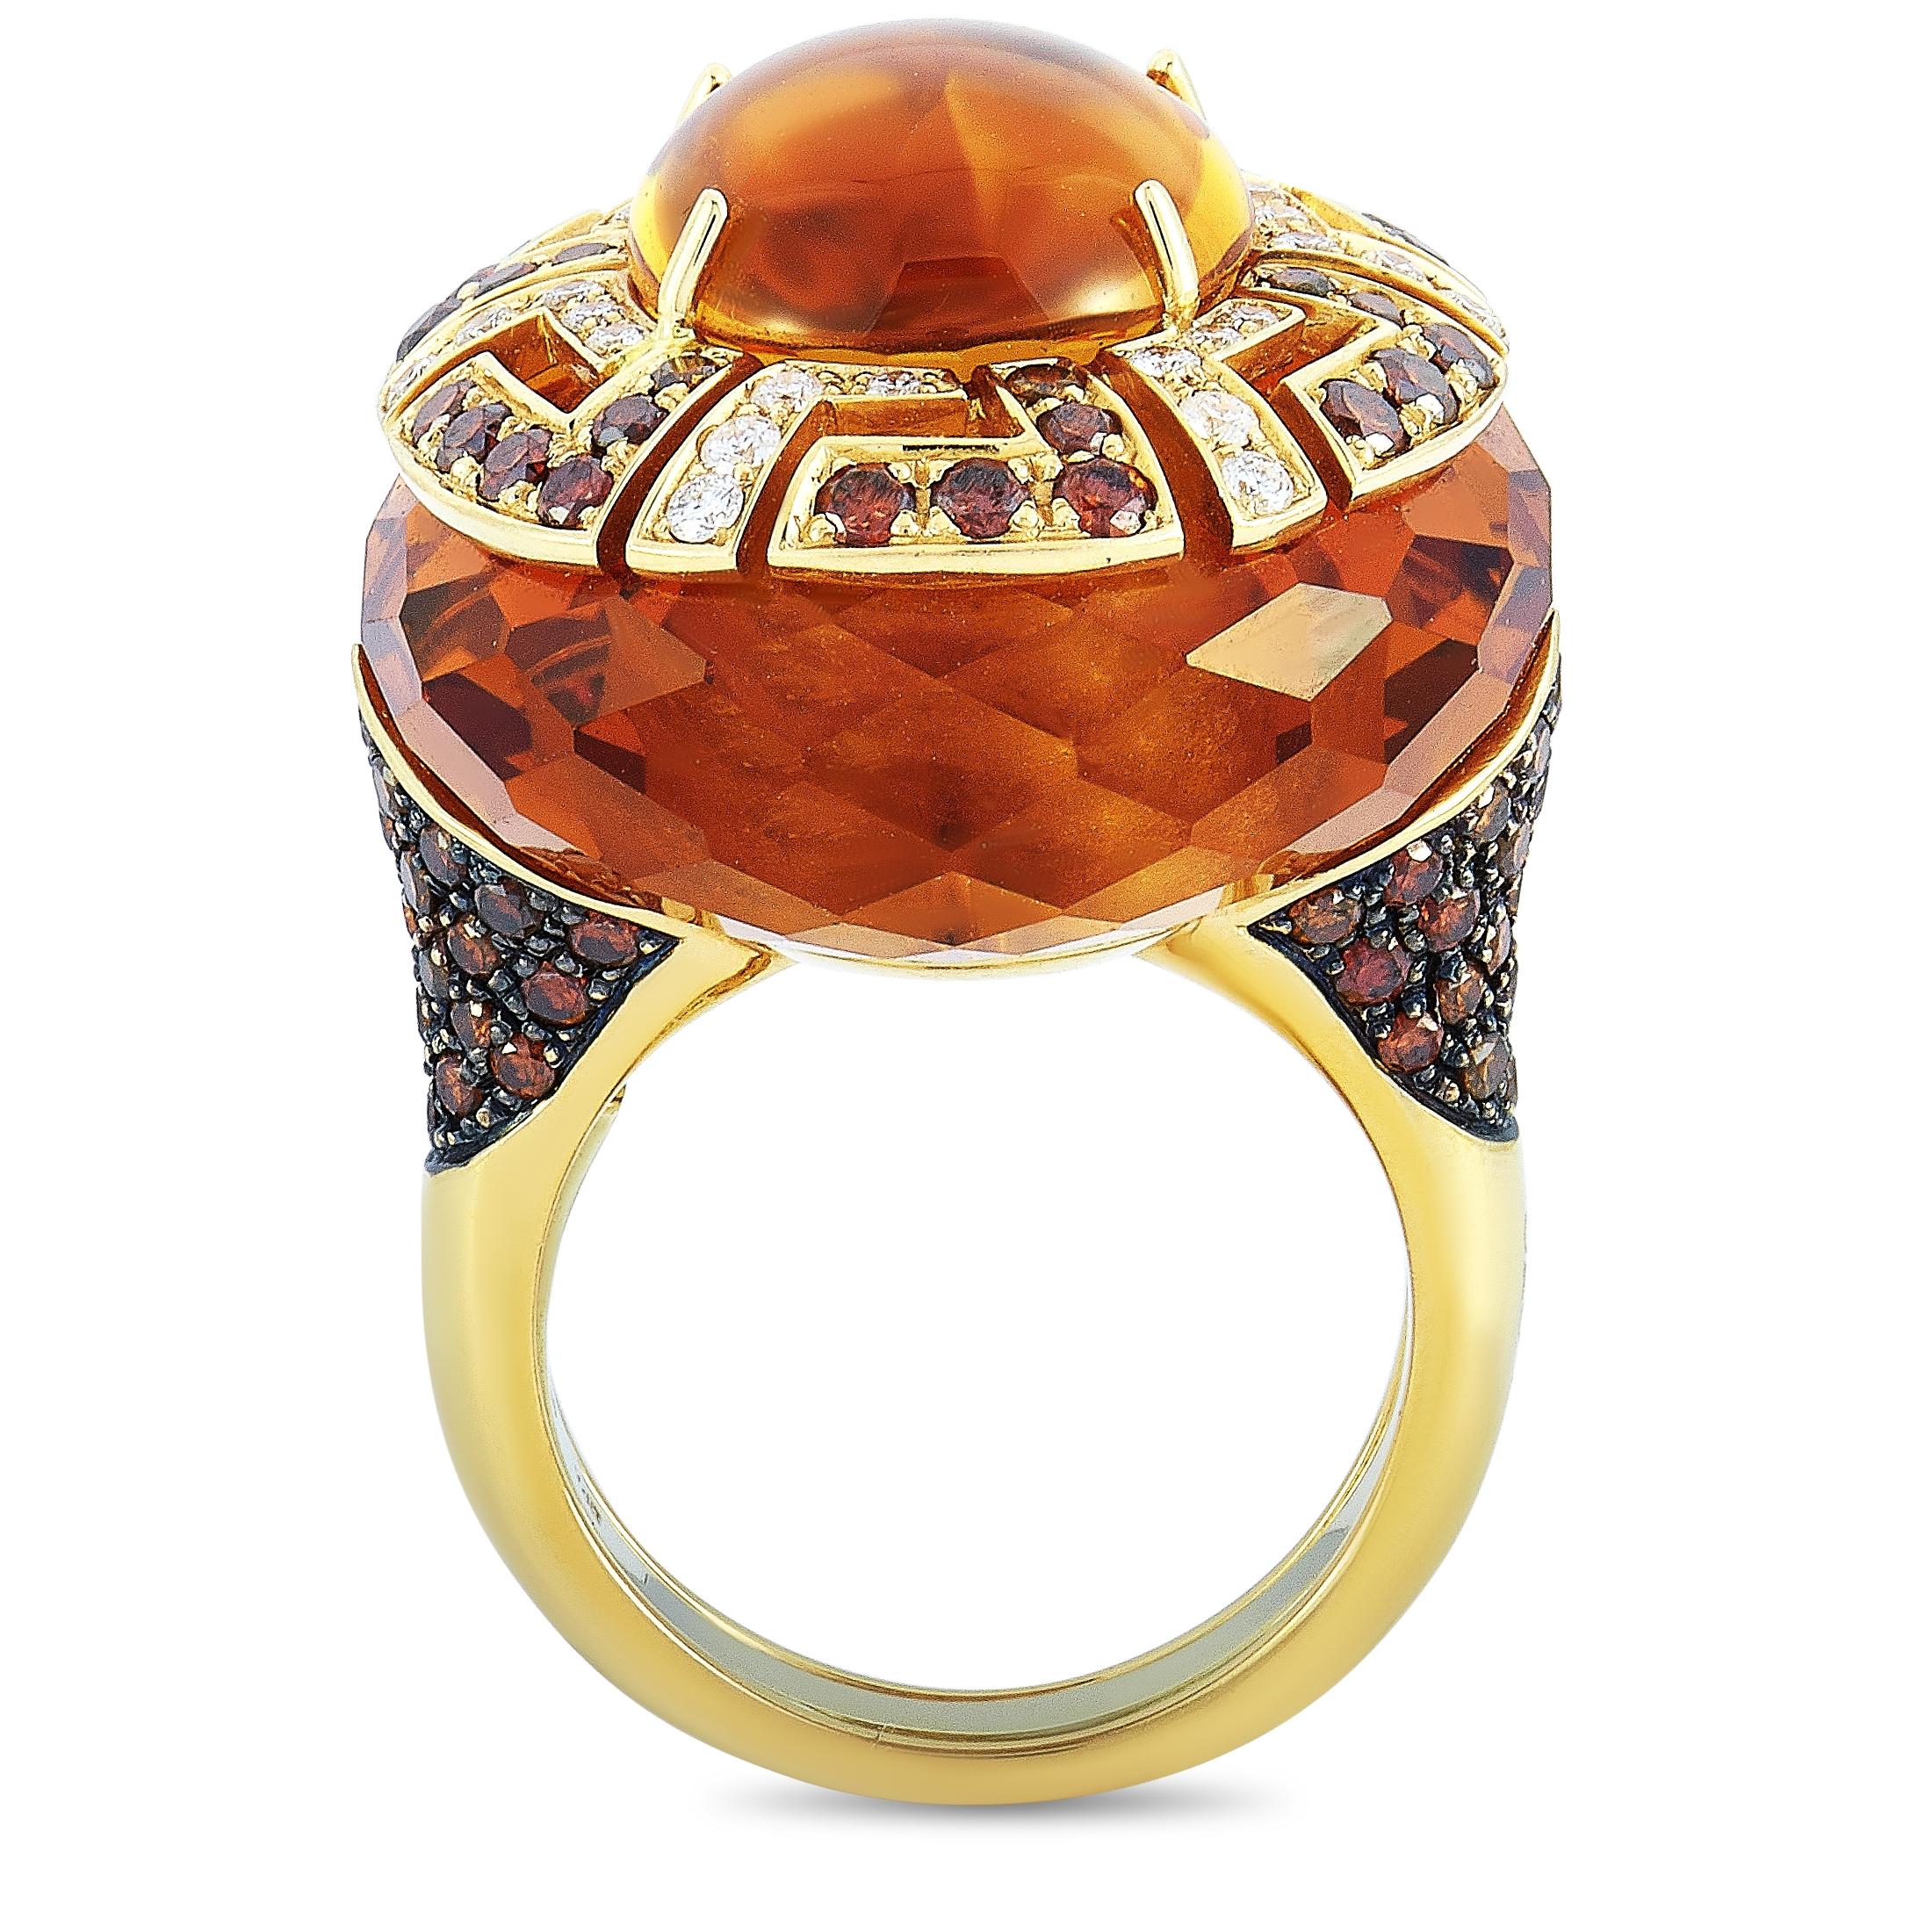 This Oro Trend ring is made of 18K rose gold and weighs 24.2 grams, boasting band thickness of 3 mm and top height of 15 mm, while top dimensions measure 22 by 27 mm. The ring is embellished with citrine and with white and brown diamonds that total